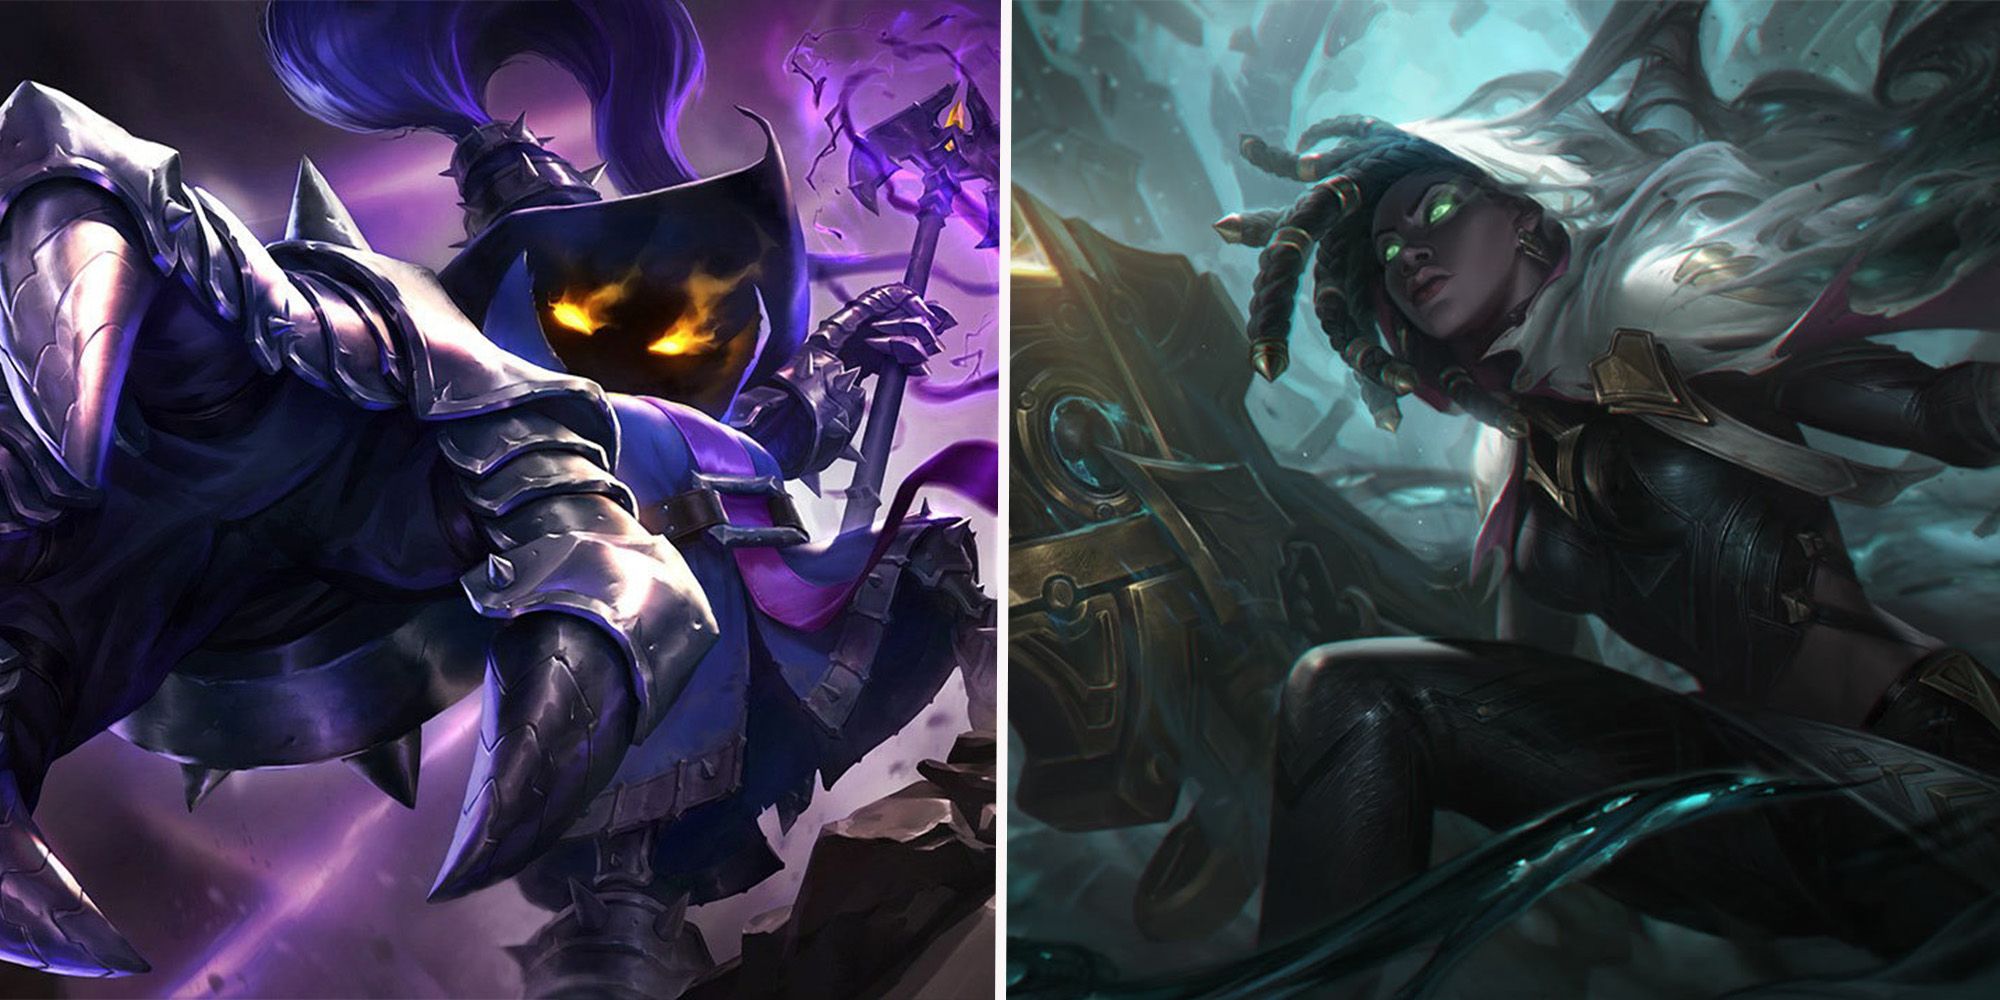 Senna and Veigar from league of Legends